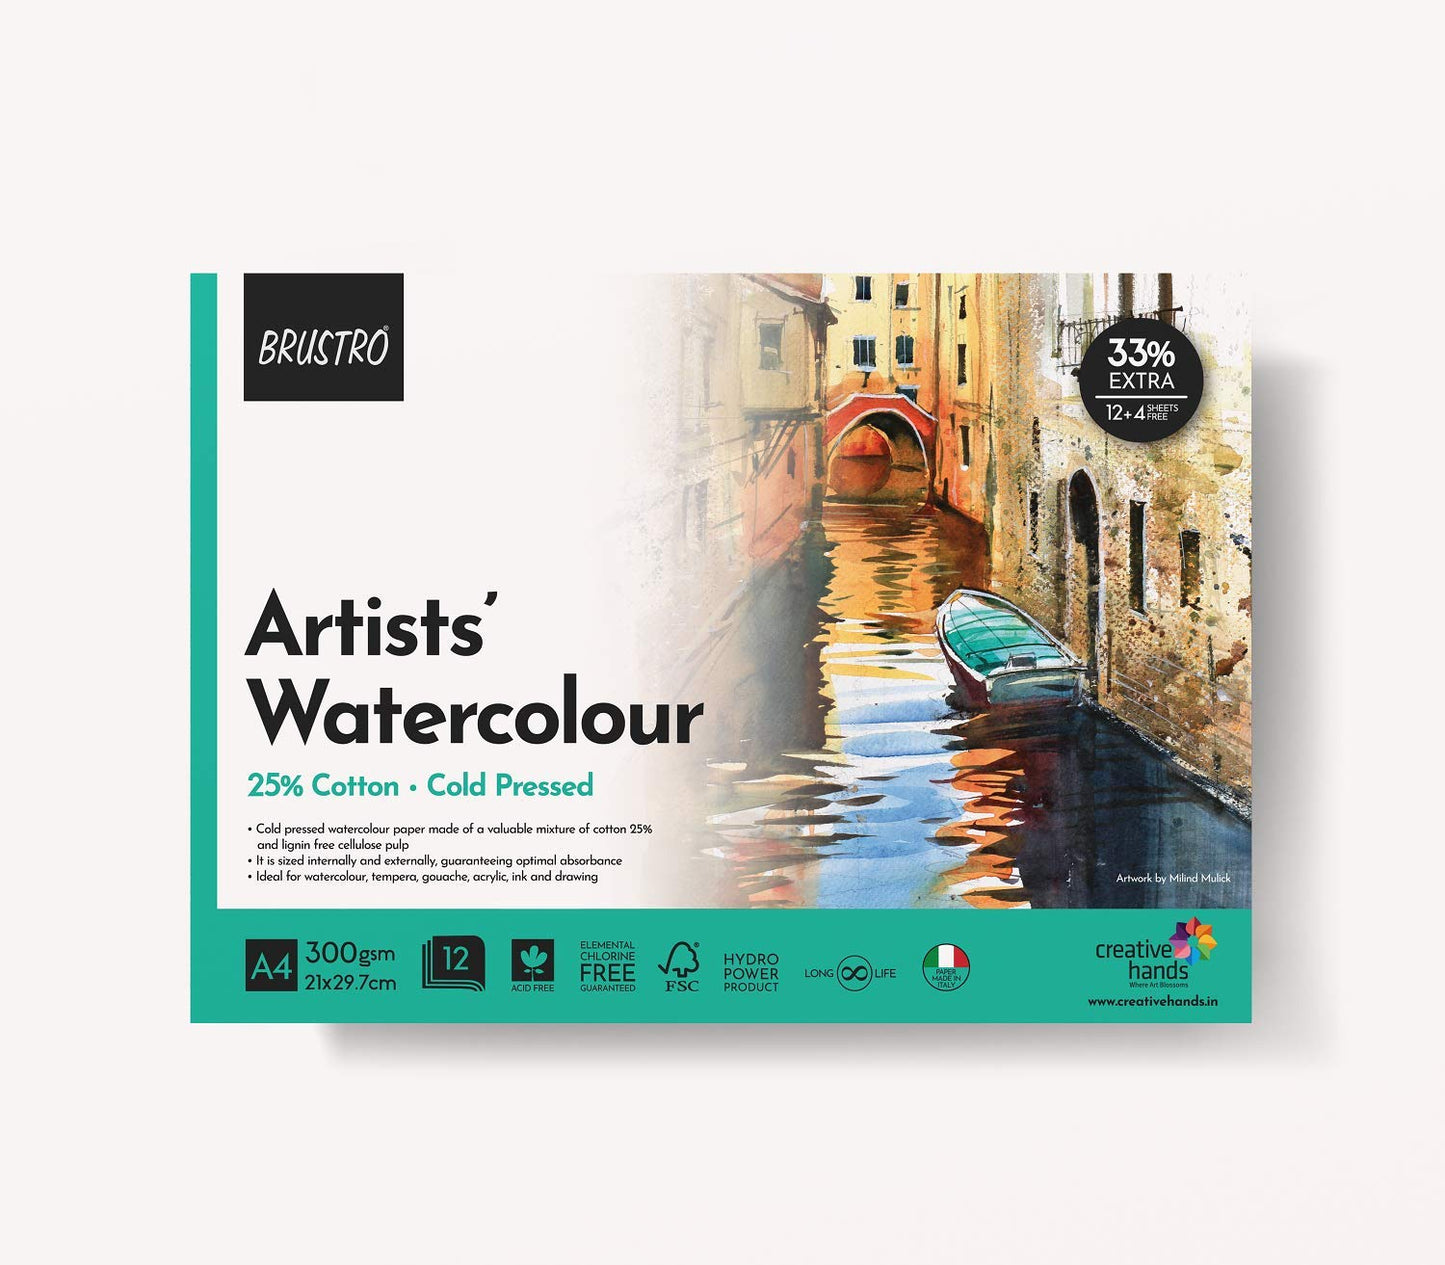 BRUSTRO Artist Watercolour Pad Cold Pressed 300 GSM 25% Cotton A4 - (12 + 4 Free Sheets)